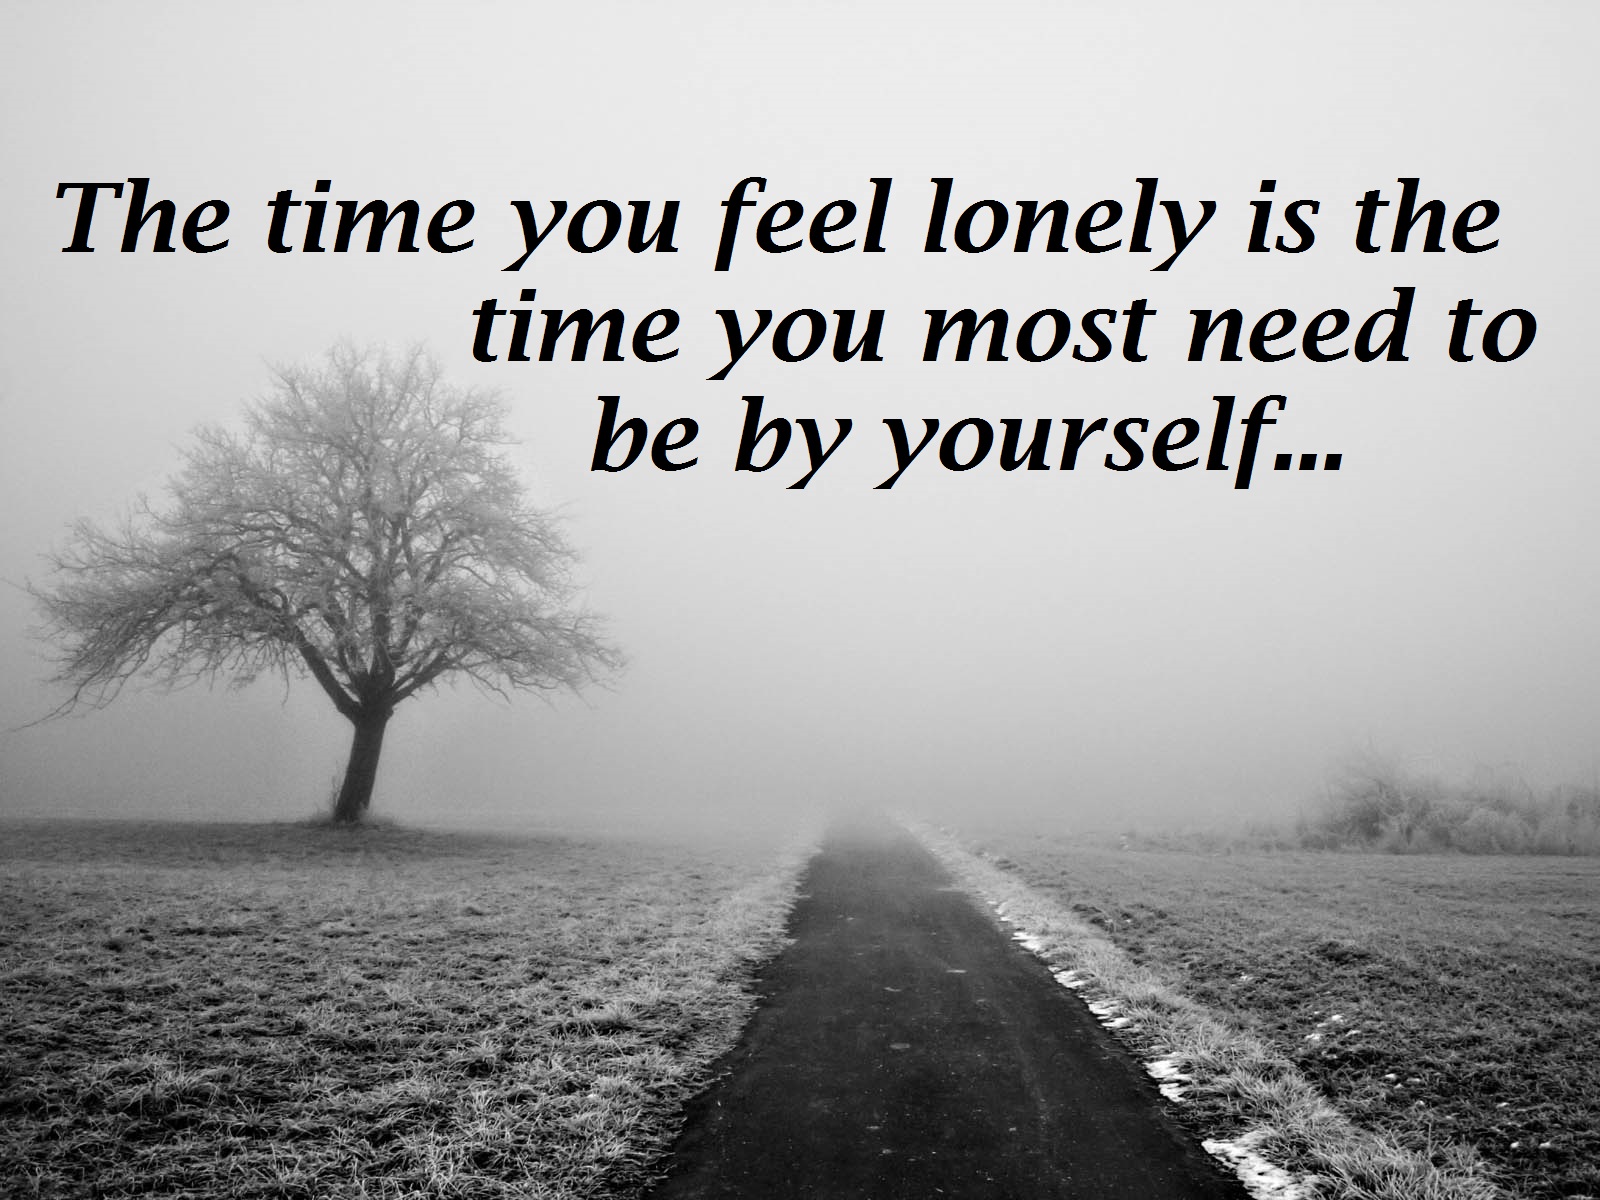 Lonely Quotes Pictures & Images 2020 free download